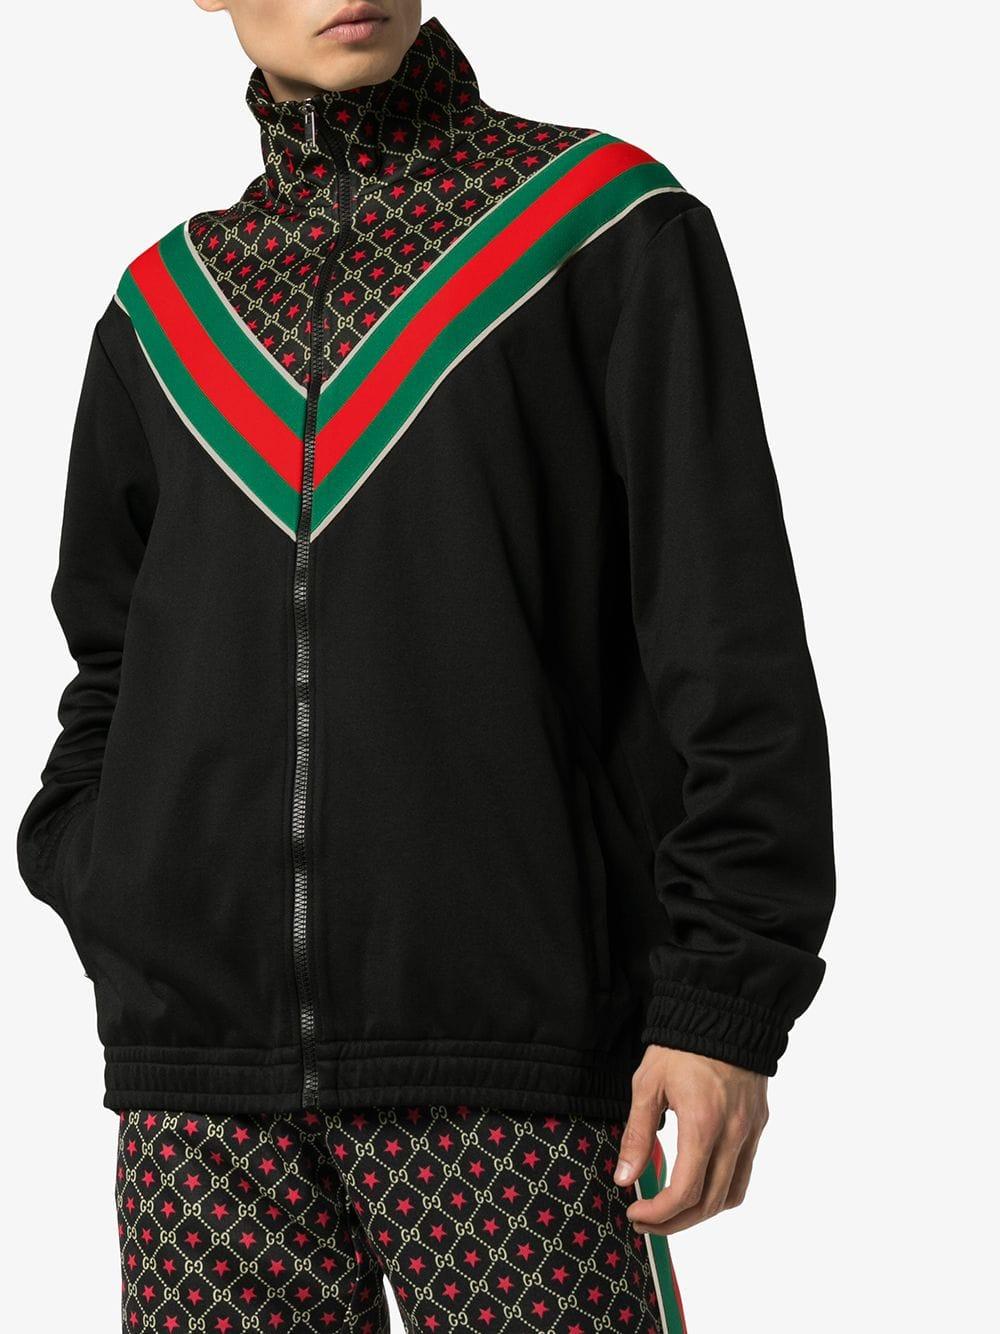 Gucci Synthetic Ao Star Track Jacket in Black Brown (Black) for Men - Lyst